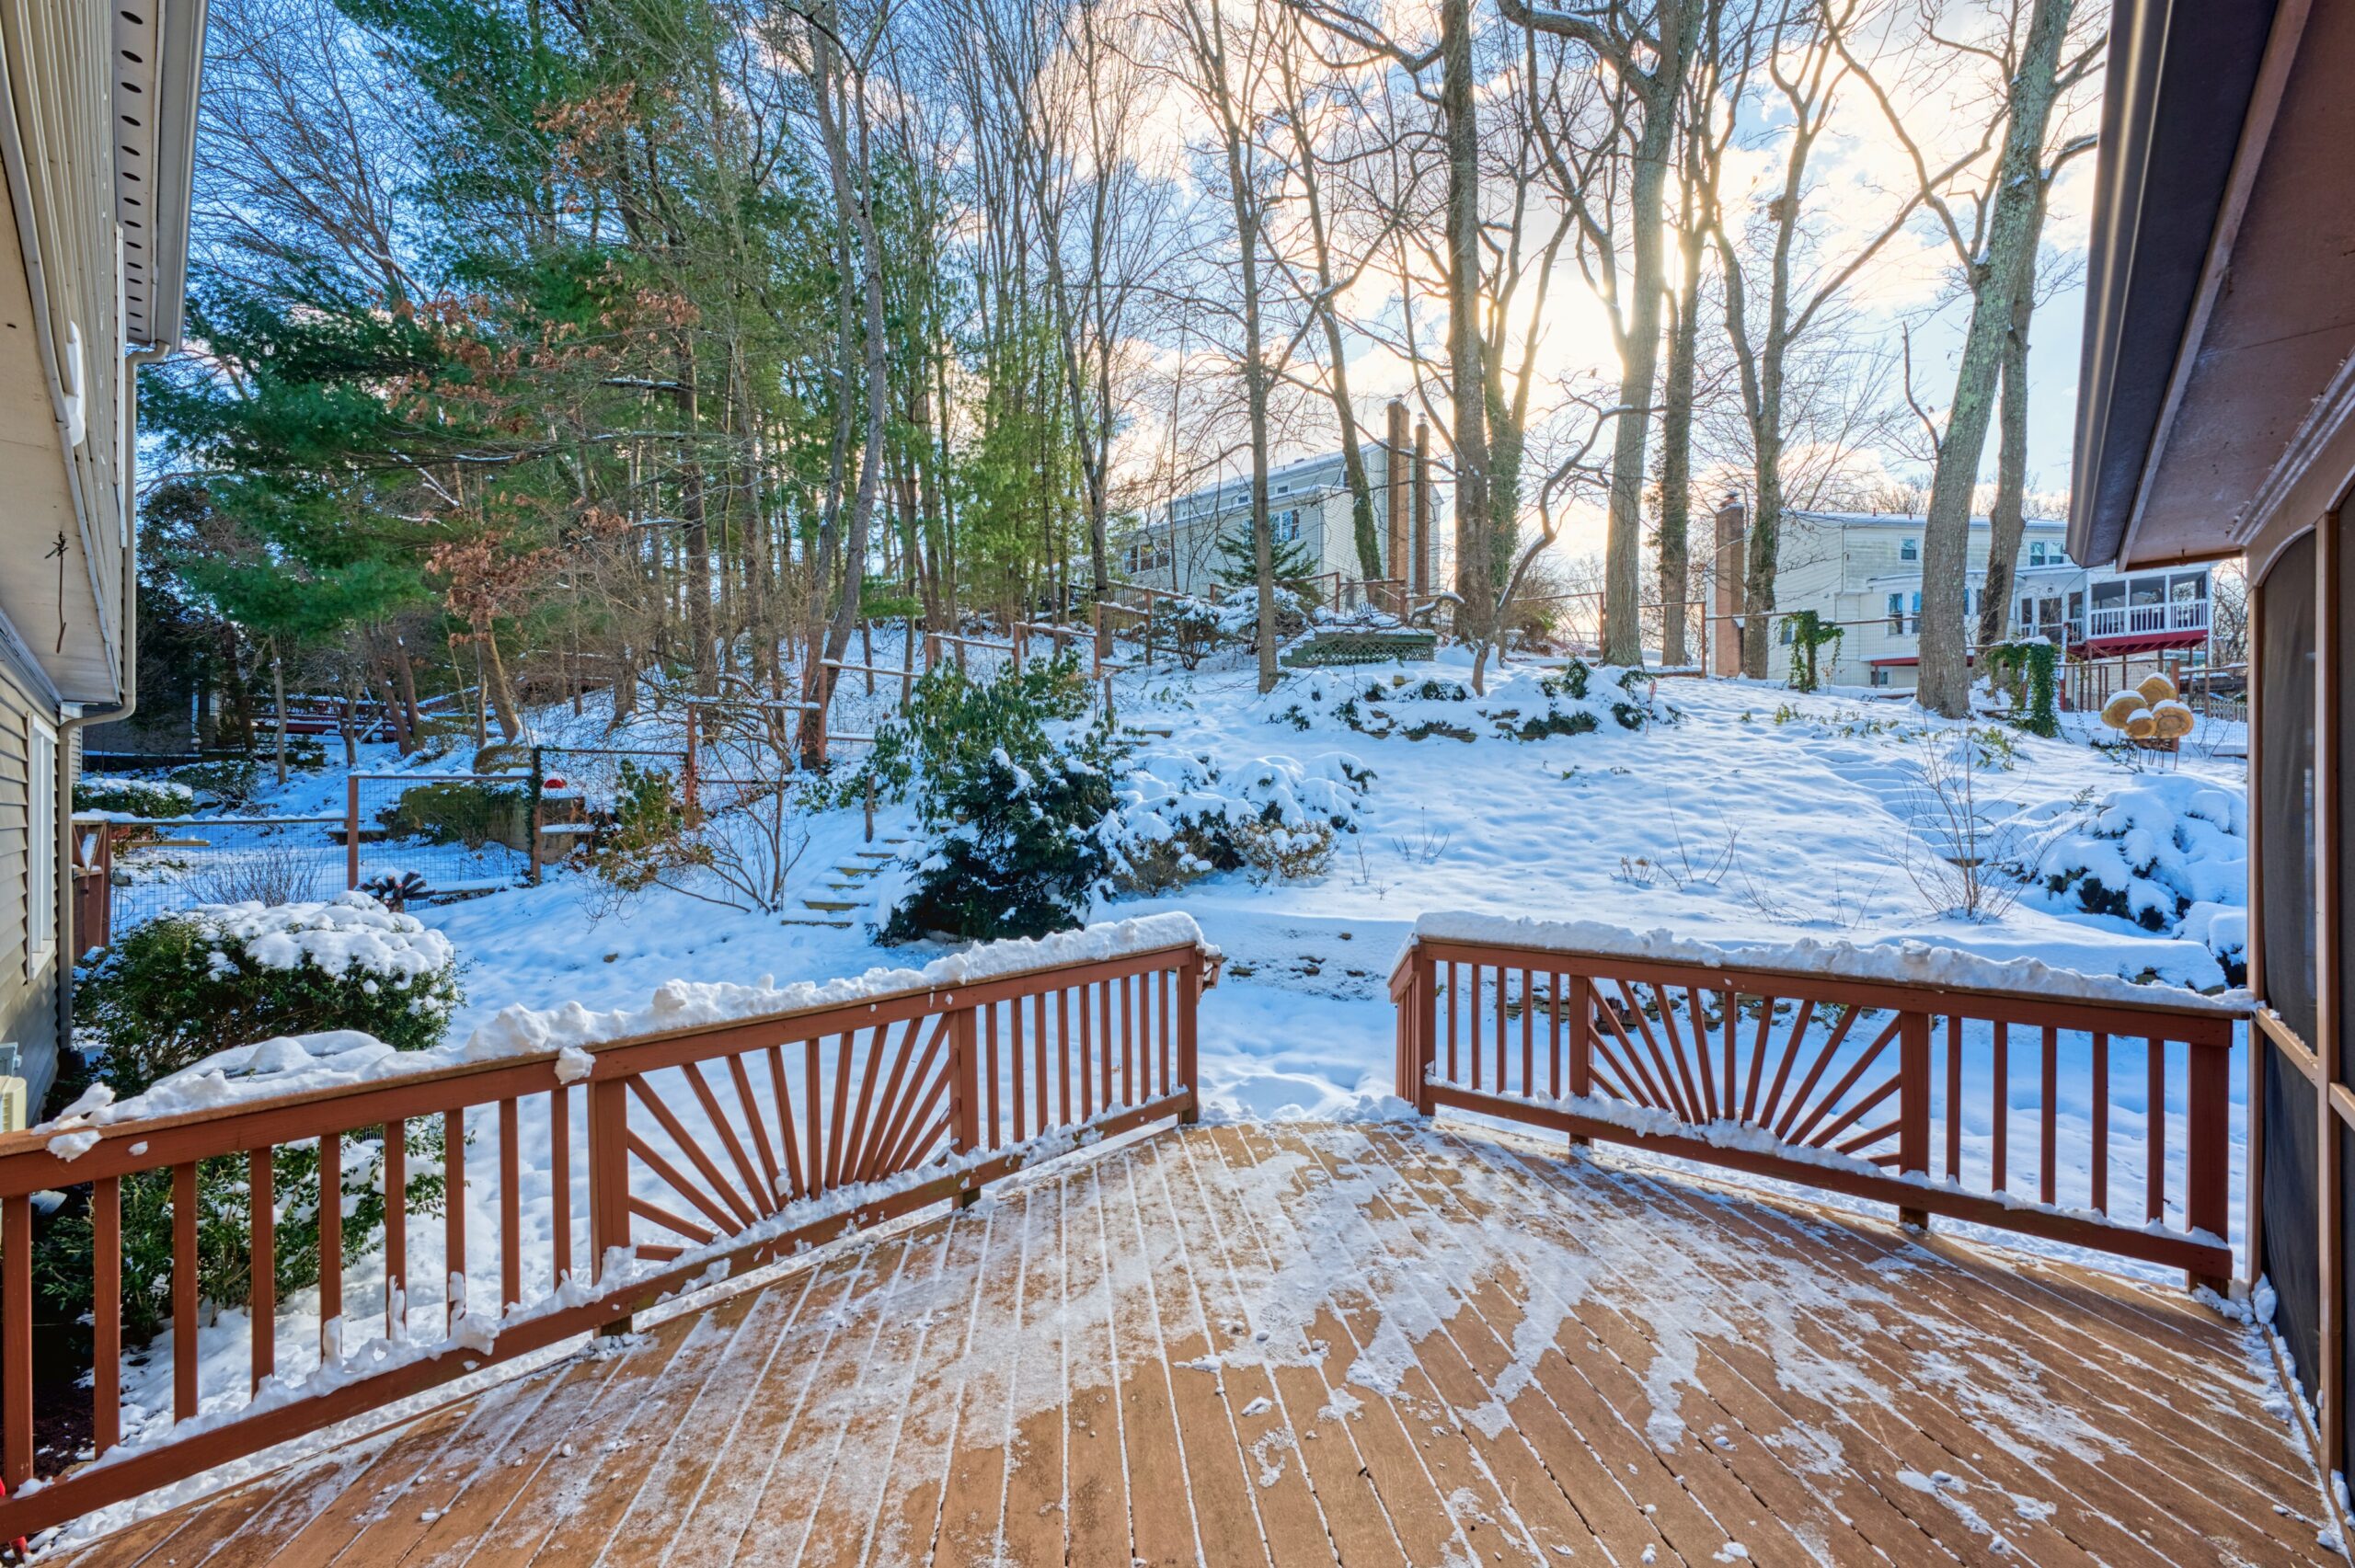 Professional exterior photo of 9515 Center St in Vienna, Virginia - showing the view from the door to the screened porch out over the uncovered deck on a snowy day